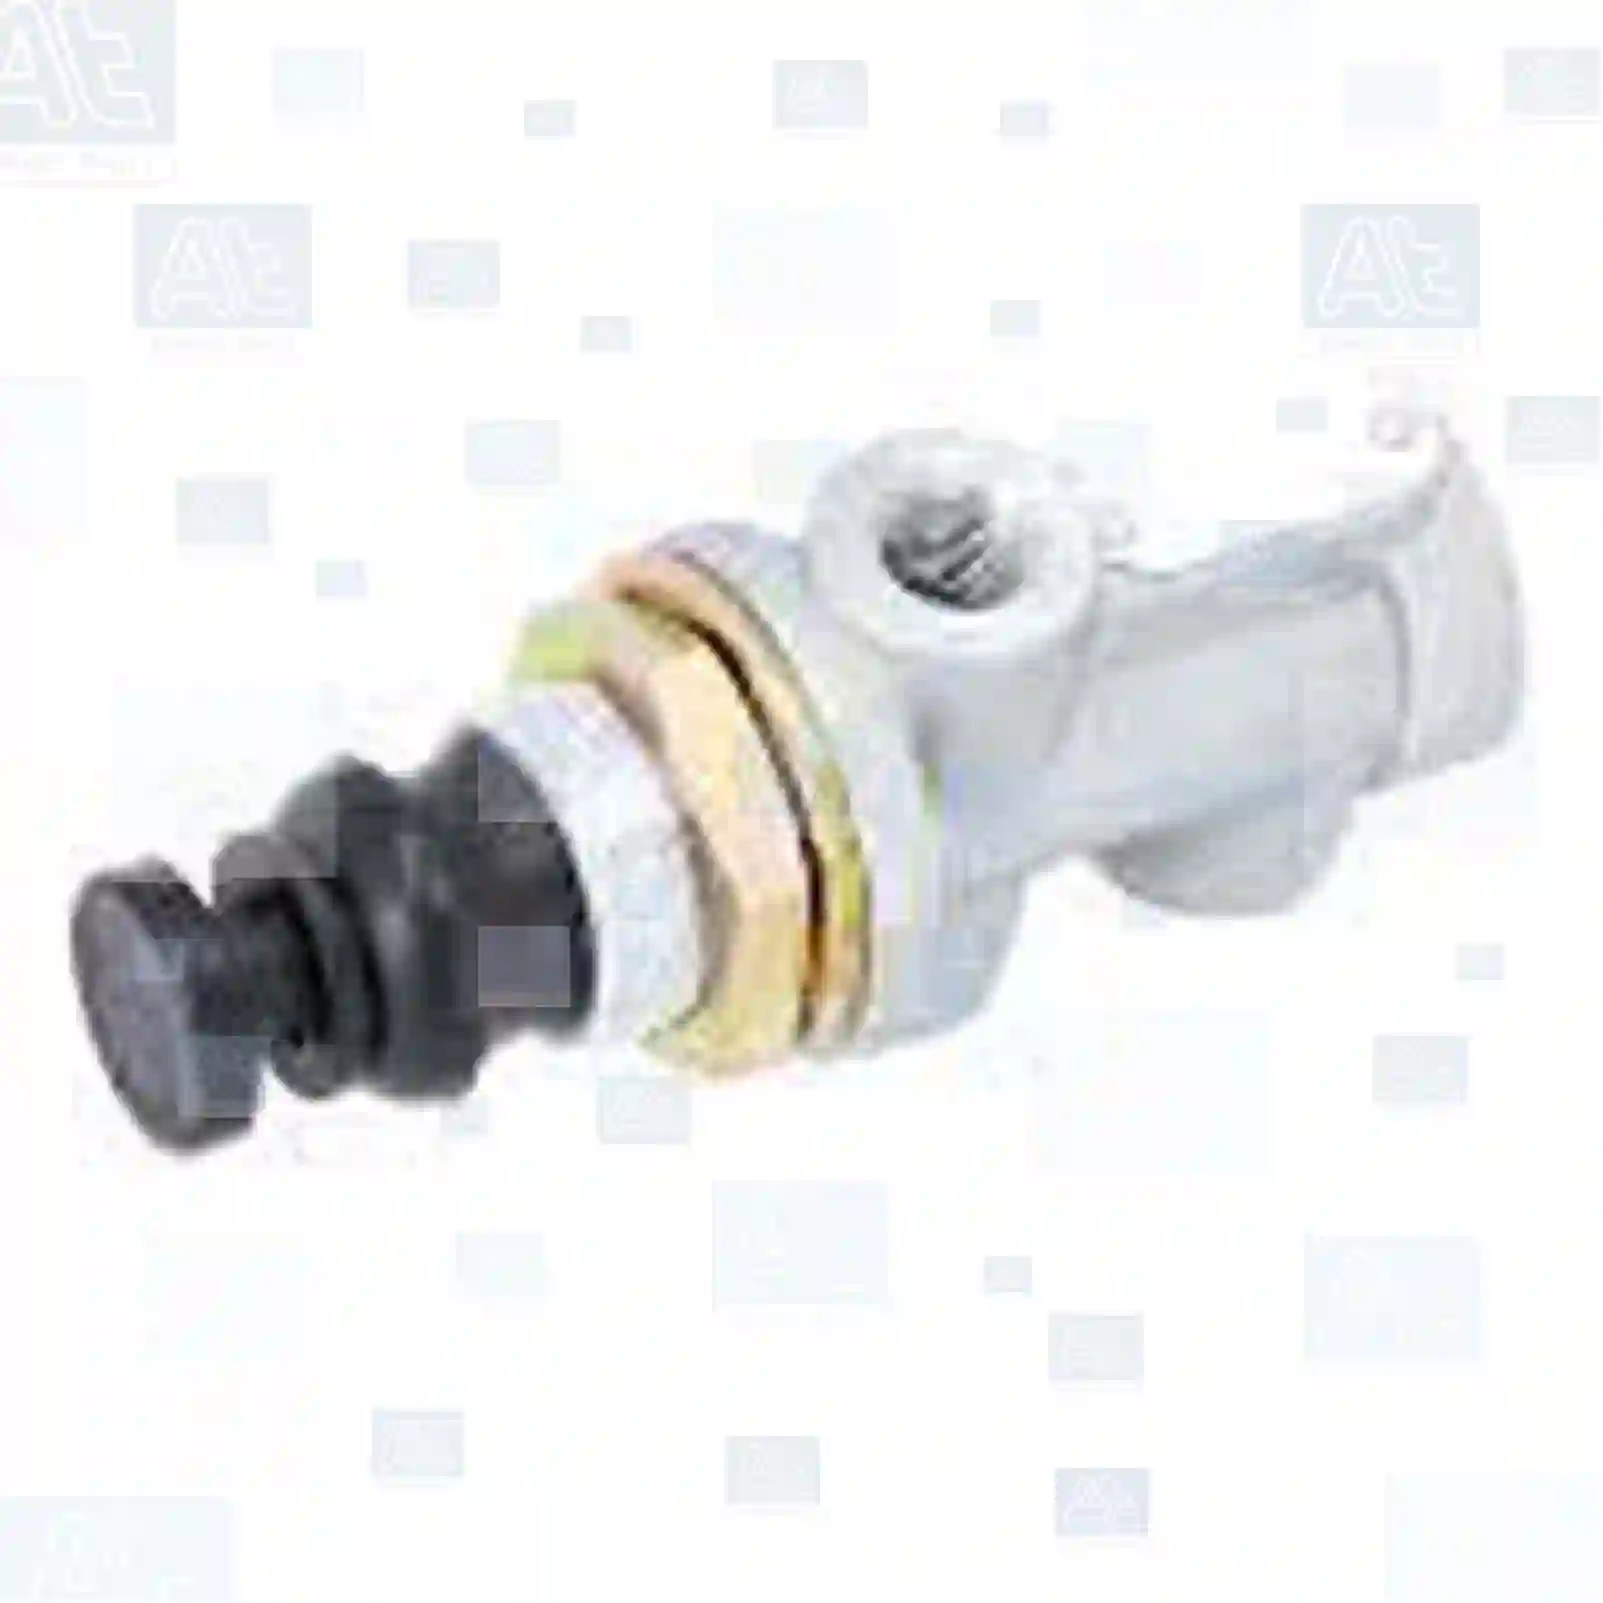 Exhaust brake valve, with plastic tappet, at no 77713769, oem no: 0639394, 1505073, 1505074, 1505075, 1761990, 367684, 639394, 00980892, 02564591, 03421094, 04604222, 04782794, 42020976, 42021846, 42052979, 4604222, 4782794, 61232936, 04630131160, 81521856009, 81521856014, 81521856018, 81521856041, 81521856045, 81521859009, 81521859014, 81521859018, 88521636202, 88521636206, 0004340501, 0004341001, 0004342001, 0004342101, 0004342301, 0004342901, 0004343101, 0004344001, 0012609157, 0039972336, 3454347001, 5000786419, 5021170180, 5021170181, 5430010099, 1934903, 1934904, 340176, 340178, 6645266, 6645268, ZG50463-0008 At Spare Part | Engine, Accelerator Pedal, Camshaft, Connecting Rod, Crankcase, Crankshaft, Cylinder Head, Engine Suspension Mountings, Exhaust Manifold, Exhaust Gas Recirculation, Filter Kits, Flywheel Housing, General Overhaul Kits, Engine, Intake Manifold, Oil Cleaner, Oil Cooler, Oil Filter, Oil Pump, Oil Sump, Piston & Liner, Sensor & Switch, Timing Case, Turbocharger, Cooling System, Belt Tensioner, Coolant Filter, Coolant Pipe, Corrosion Prevention Agent, Drive, Expansion Tank, Fan, Intercooler, Monitors & Gauges, Radiator, Thermostat, V-Belt / Timing belt, Water Pump, Fuel System, Electronical Injector Unit, Feed Pump, Fuel Filter, cpl., Fuel Gauge Sender,  Fuel Line, Fuel Pump, Fuel Tank, Injection Line Kit, Injection Pump, Exhaust System, Clutch & Pedal, Gearbox, Propeller Shaft, Axles, Brake System, Hubs & Wheels, Suspension, Leaf Spring, Universal Parts / Accessories, Steering, Electrical System, Cabin Exhaust brake valve, with plastic tappet, at no 77713769, oem no: 0639394, 1505073, 1505074, 1505075, 1761990, 367684, 639394, 00980892, 02564591, 03421094, 04604222, 04782794, 42020976, 42021846, 42052979, 4604222, 4782794, 61232936, 04630131160, 81521856009, 81521856014, 81521856018, 81521856041, 81521856045, 81521859009, 81521859014, 81521859018, 88521636202, 88521636206, 0004340501, 0004341001, 0004342001, 0004342101, 0004342301, 0004342901, 0004343101, 0004344001, 0012609157, 0039972336, 3454347001, 5000786419, 5021170180, 5021170181, 5430010099, 1934903, 1934904, 340176, 340178, 6645266, 6645268, ZG50463-0008 At Spare Part | Engine, Accelerator Pedal, Camshaft, Connecting Rod, Crankcase, Crankshaft, Cylinder Head, Engine Suspension Mountings, Exhaust Manifold, Exhaust Gas Recirculation, Filter Kits, Flywheel Housing, General Overhaul Kits, Engine, Intake Manifold, Oil Cleaner, Oil Cooler, Oil Filter, Oil Pump, Oil Sump, Piston & Liner, Sensor & Switch, Timing Case, Turbocharger, Cooling System, Belt Tensioner, Coolant Filter, Coolant Pipe, Corrosion Prevention Agent, Drive, Expansion Tank, Fan, Intercooler, Monitors & Gauges, Radiator, Thermostat, V-Belt / Timing belt, Water Pump, Fuel System, Electronical Injector Unit, Feed Pump, Fuel Filter, cpl., Fuel Gauge Sender,  Fuel Line, Fuel Pump, Fuel Tank, Injection Line Kit, Injection Pump, Exhaust System, Clutch & Pedal, Gearbox, Propeller Shaft, Axles, Brake System, Hubs & Wheels, Suspension, Leaf Spring, Universal Parts / Accessories, Steering, Electrical System, Cabin